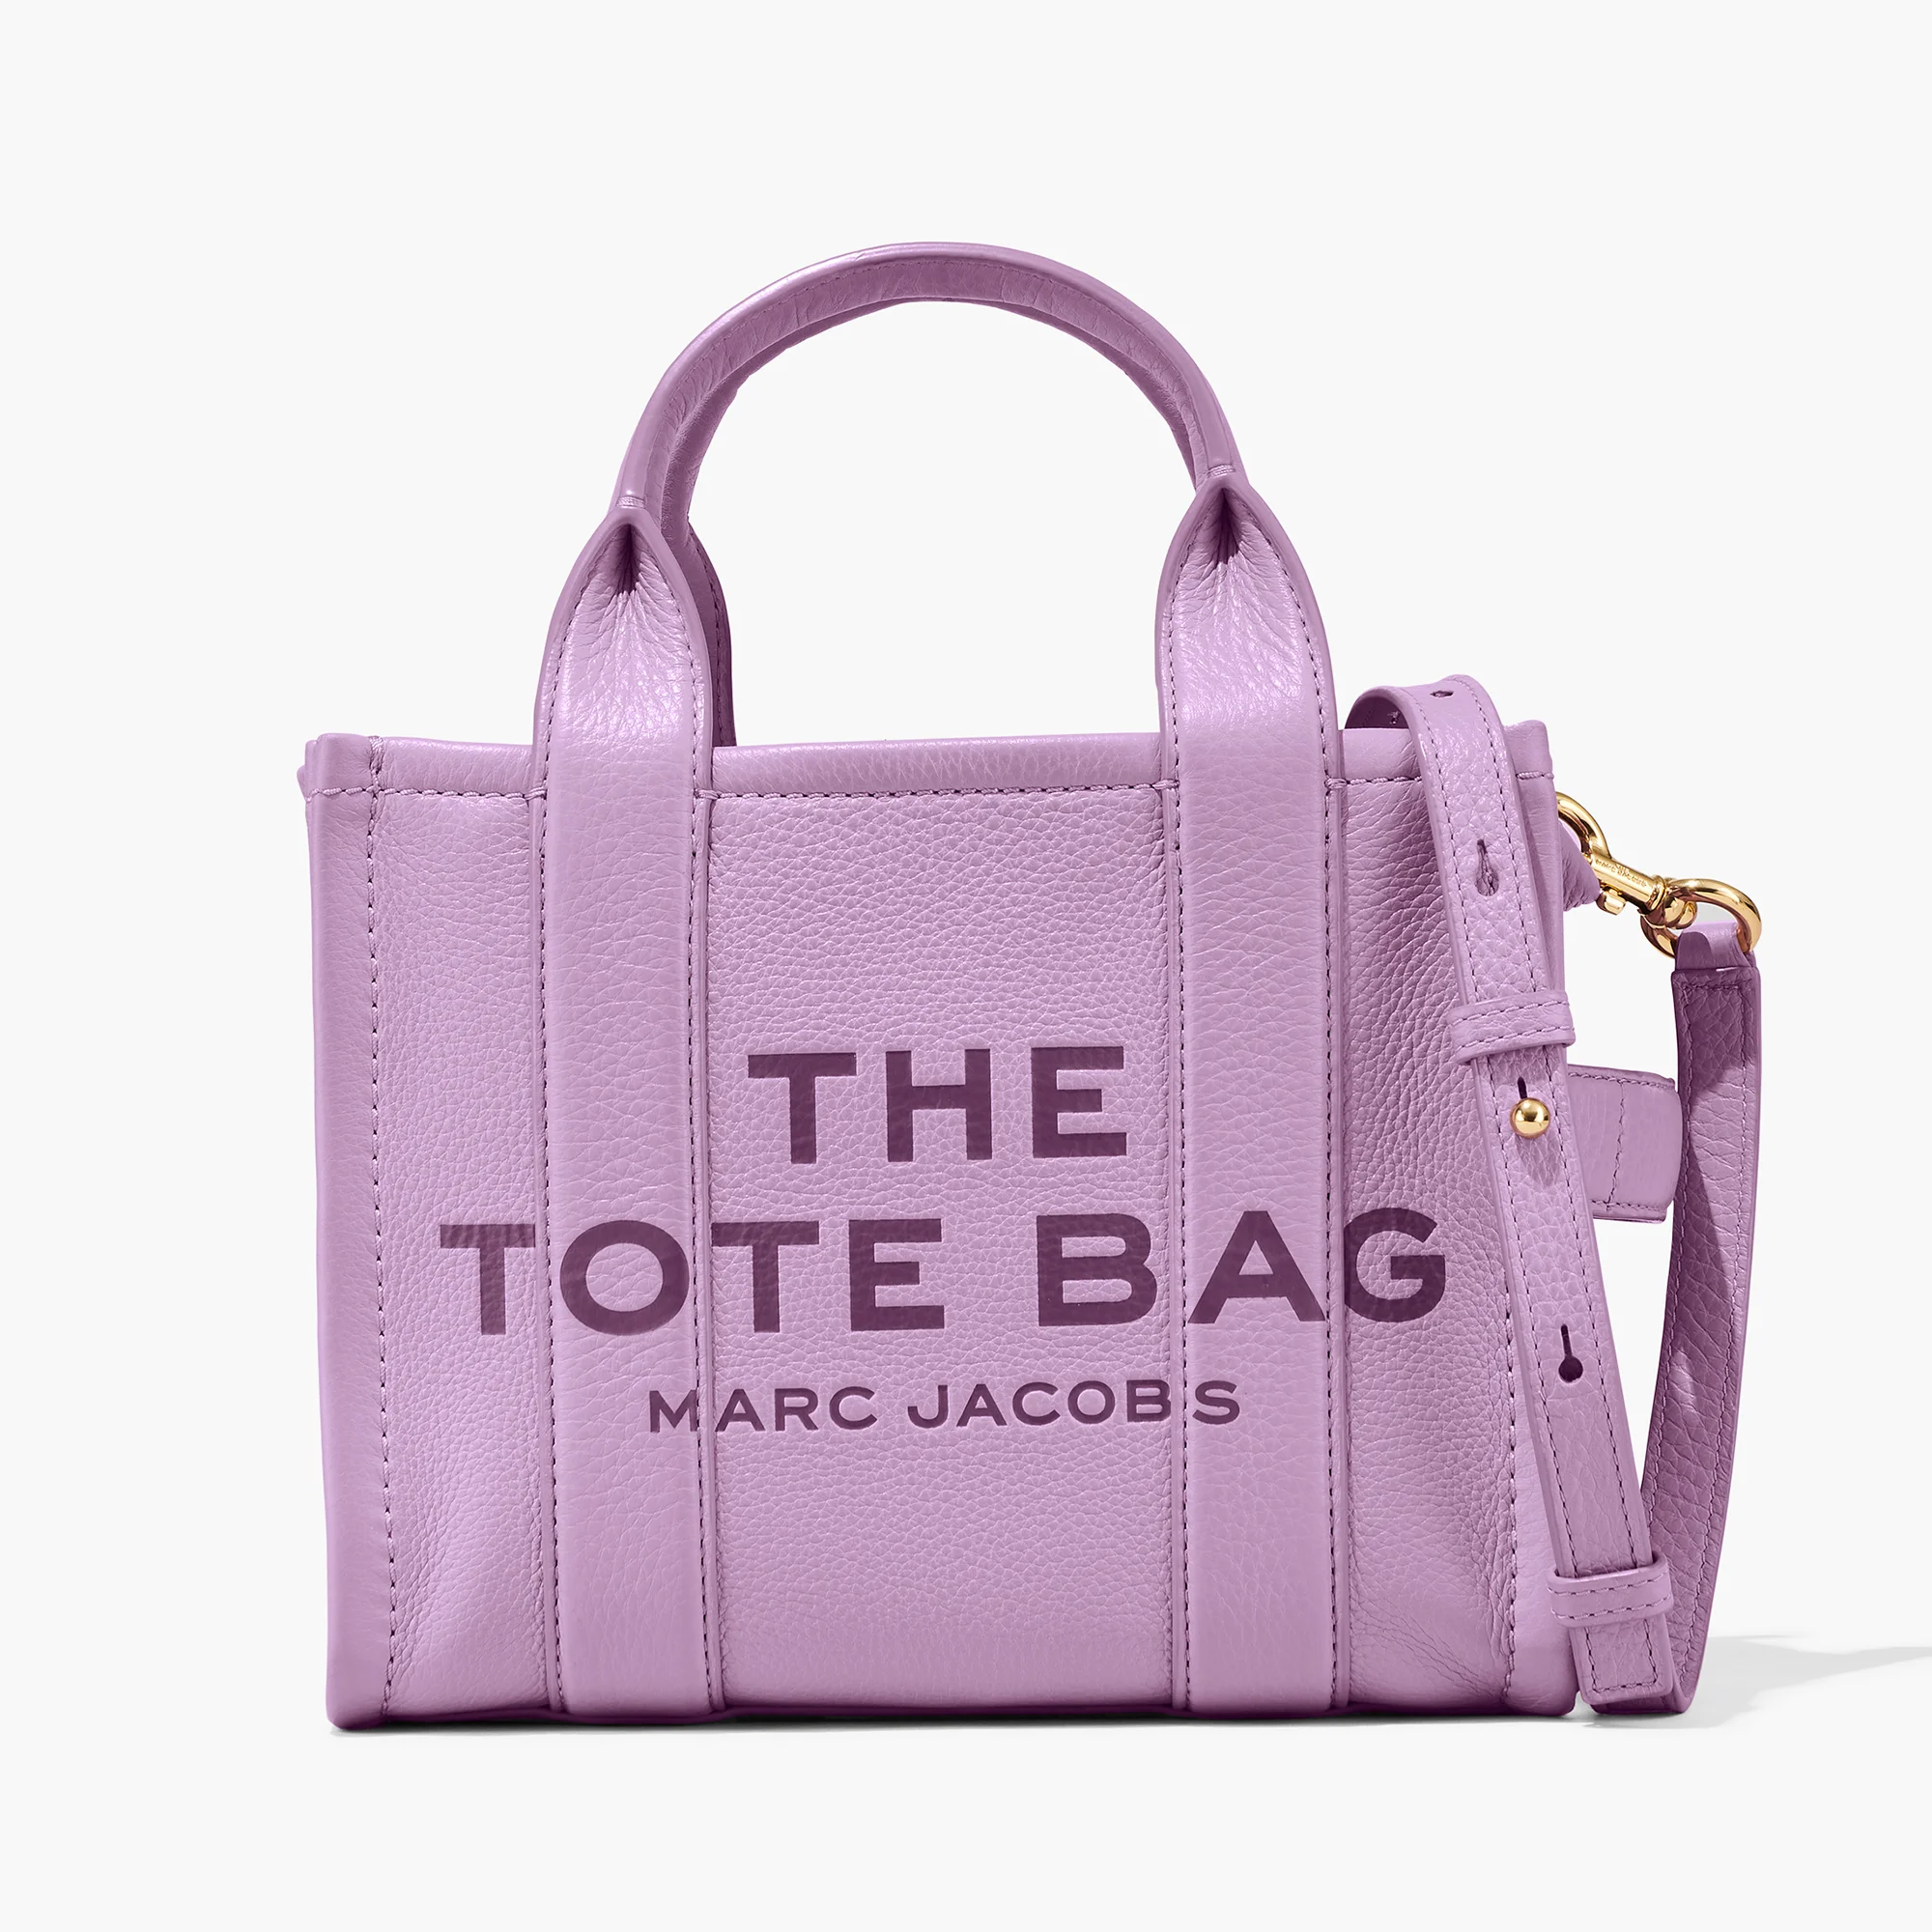 Marc Jacobs Women's The Mini Tote Bag Leather - Regal Orchid Image 1